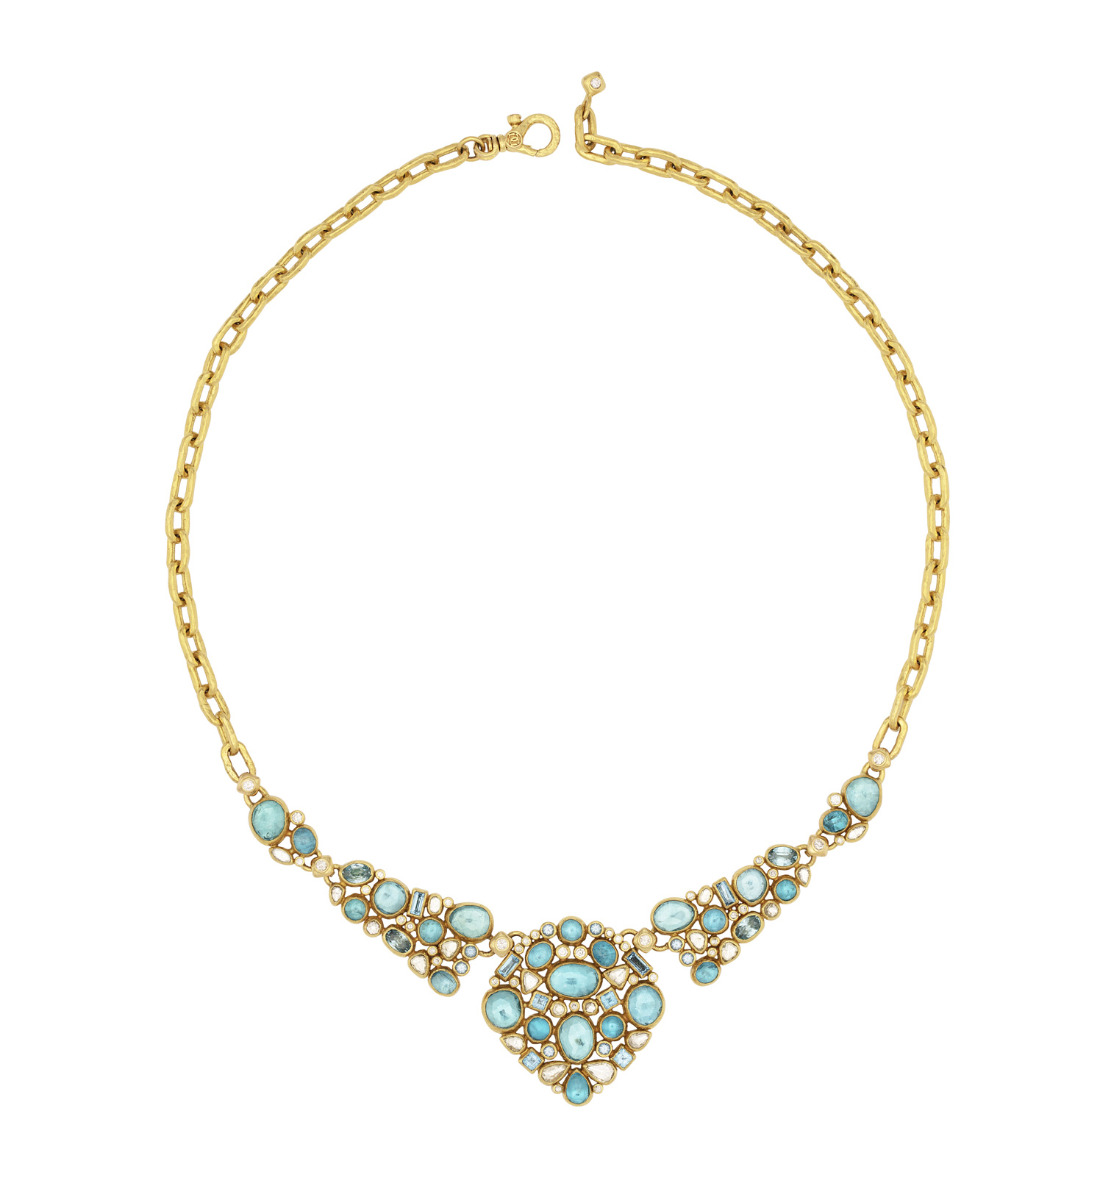 Gurhan Pointelle Gold Bib Short Necklace, Mixed Shaped Cluster Elements, with Mixed Blue Stones